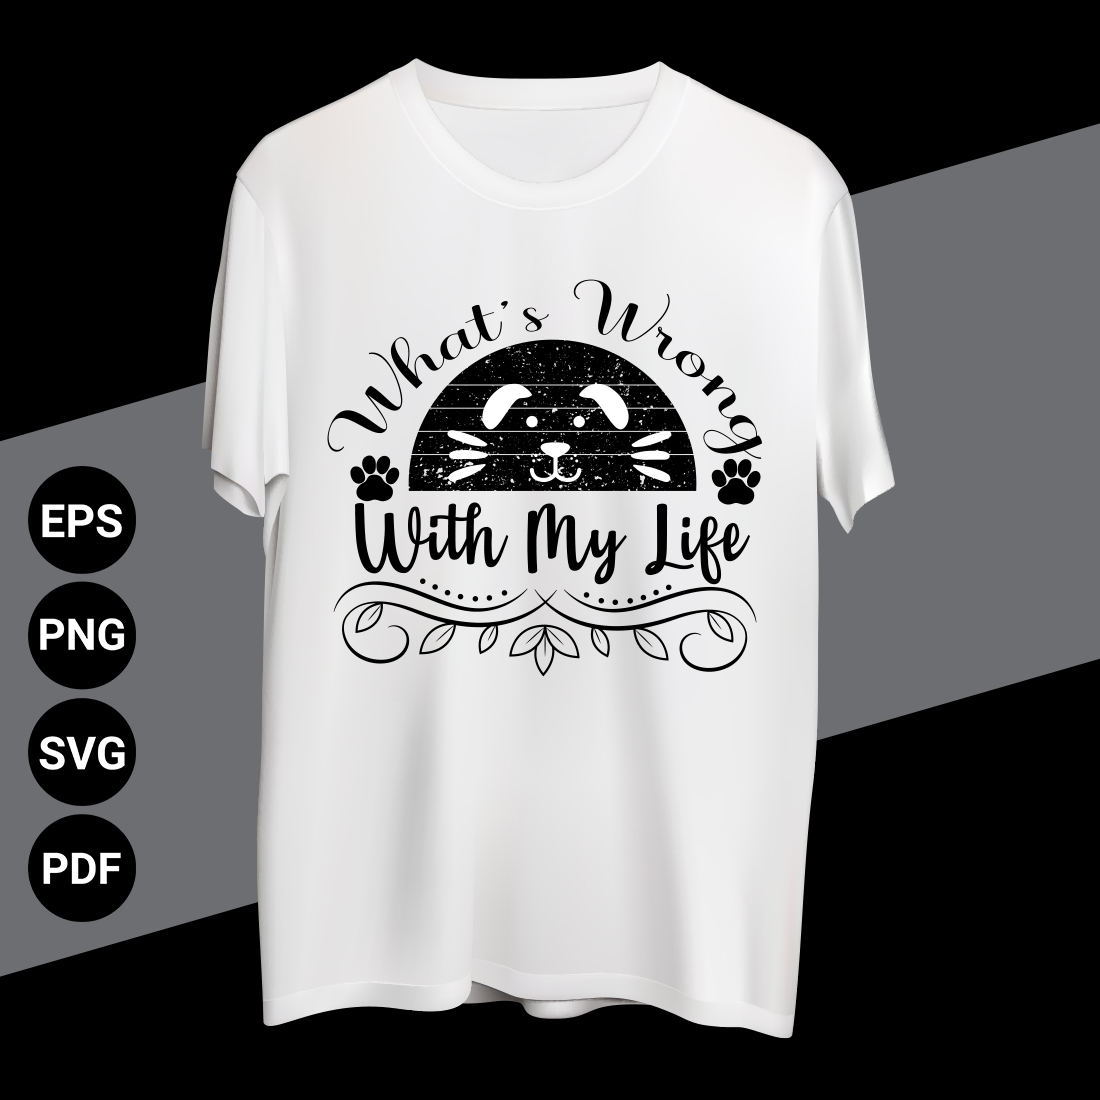 What’s Wrong With My Life T-shirt design cover image.